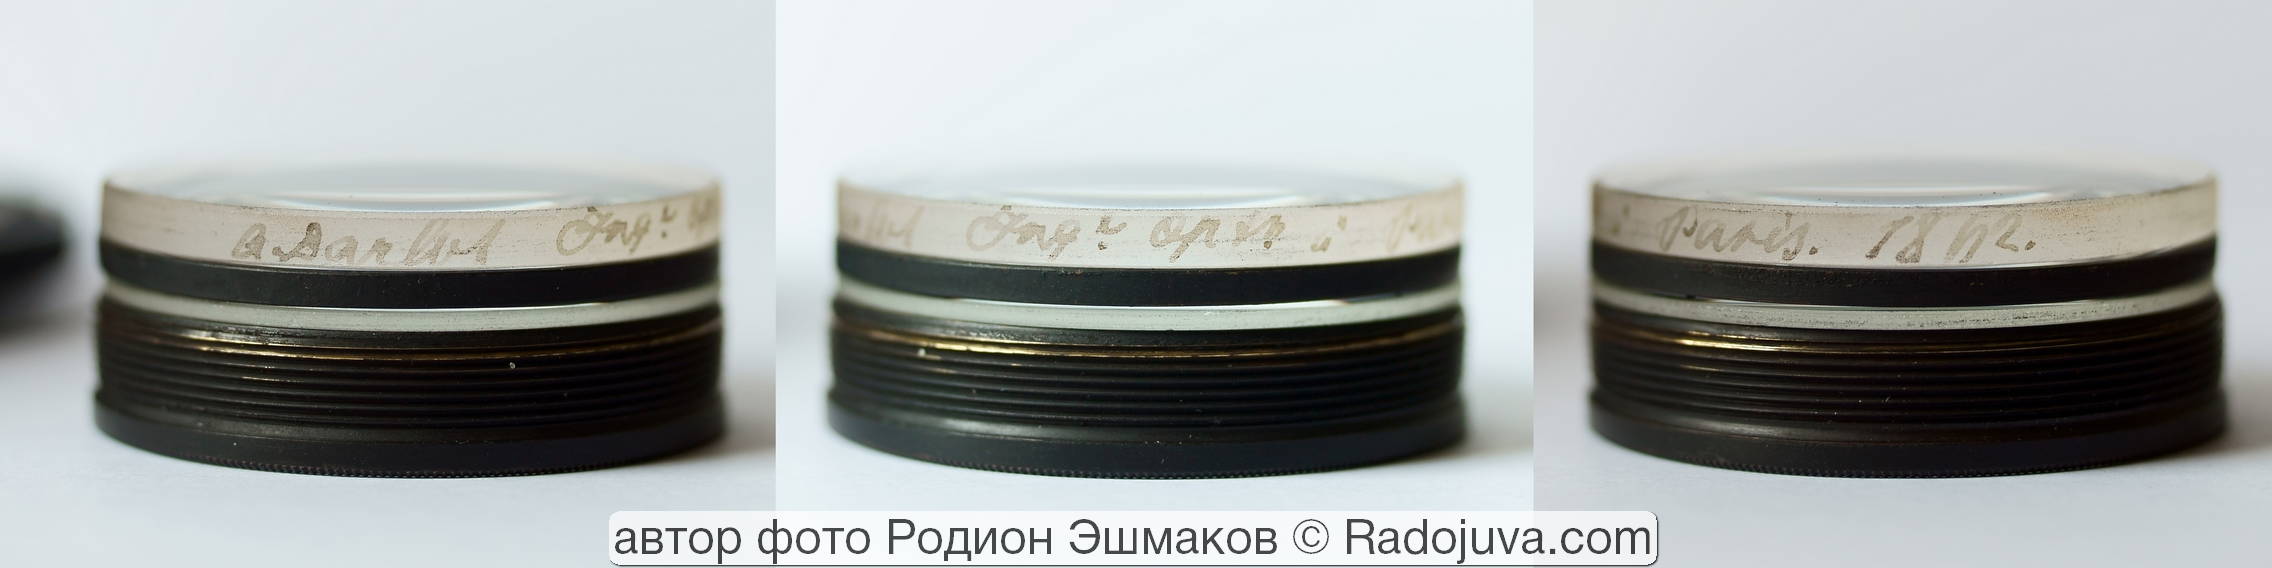 The manufacturer's engraving on the end of the third objective lens: “A. Darlot ... Paris. 1862. "